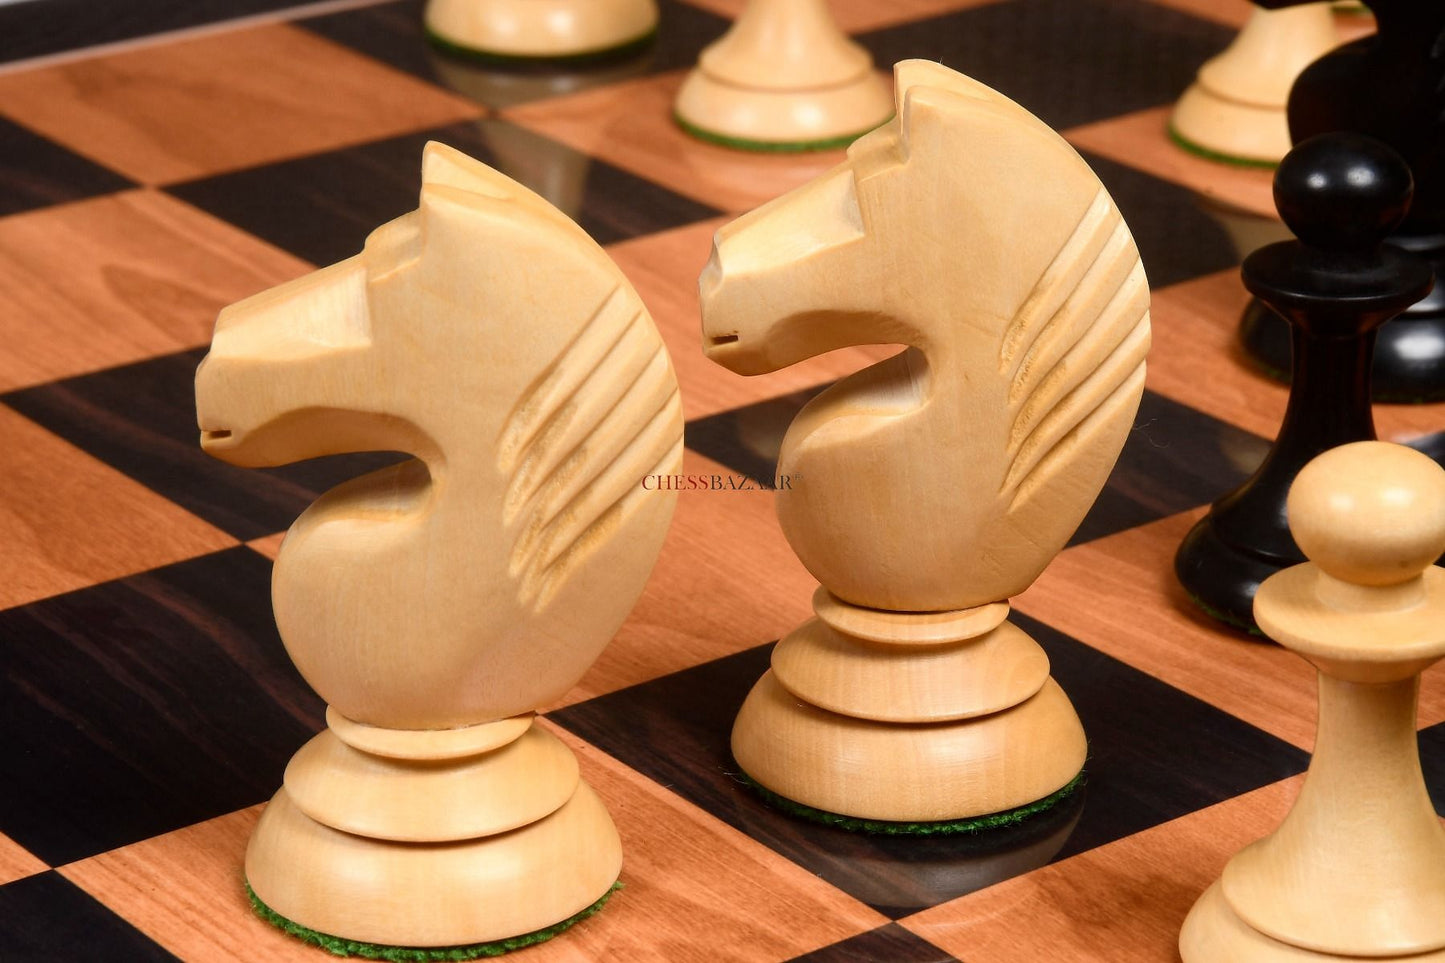 The 1950s Soviet (Russian) Latvian Reproduced Chess Pieces in Ebonized Boxwood & Natural Boxwood - 4.1" King